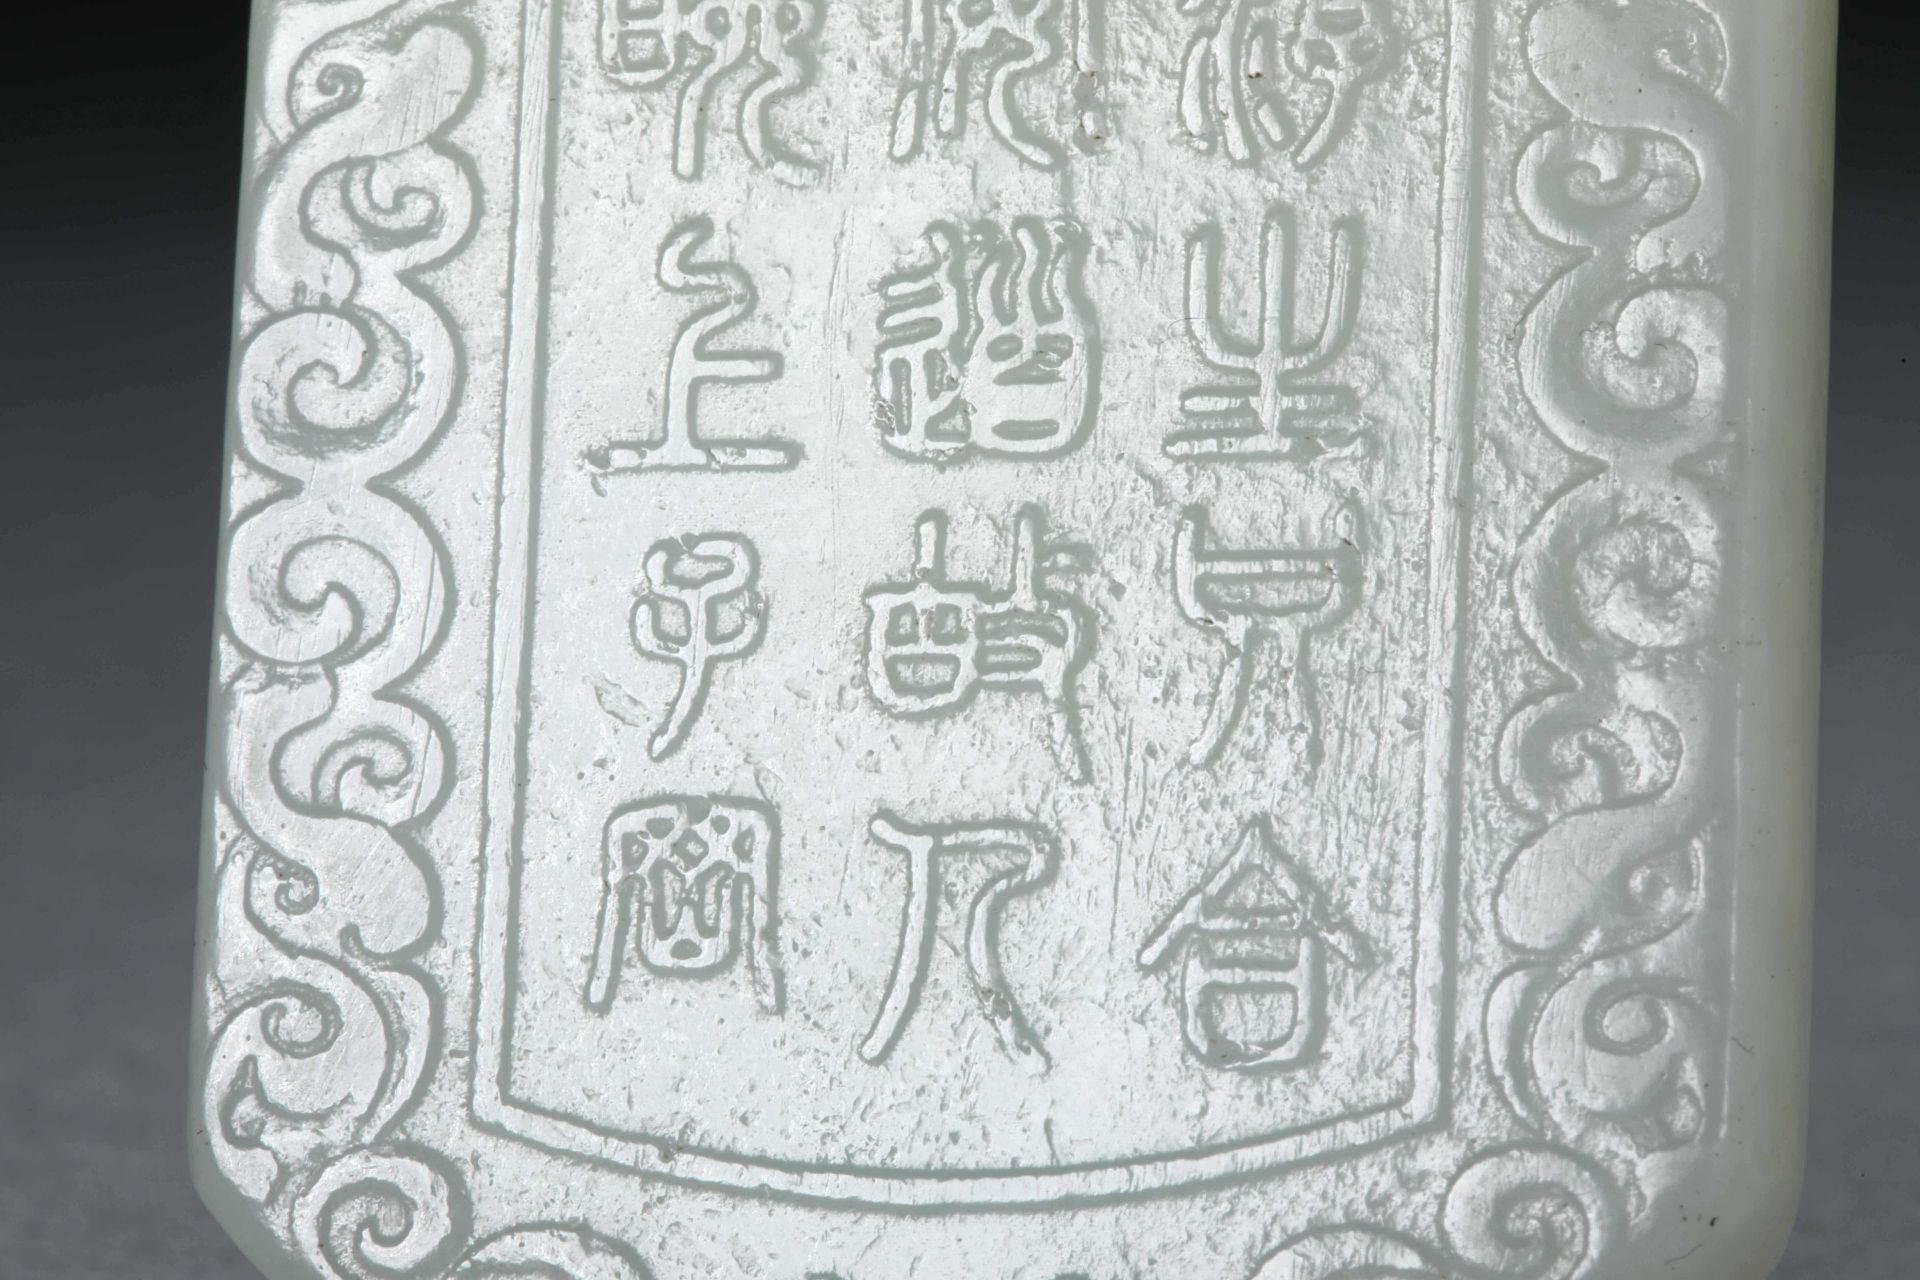 Hetian jade carved character card - Image 6 of 6